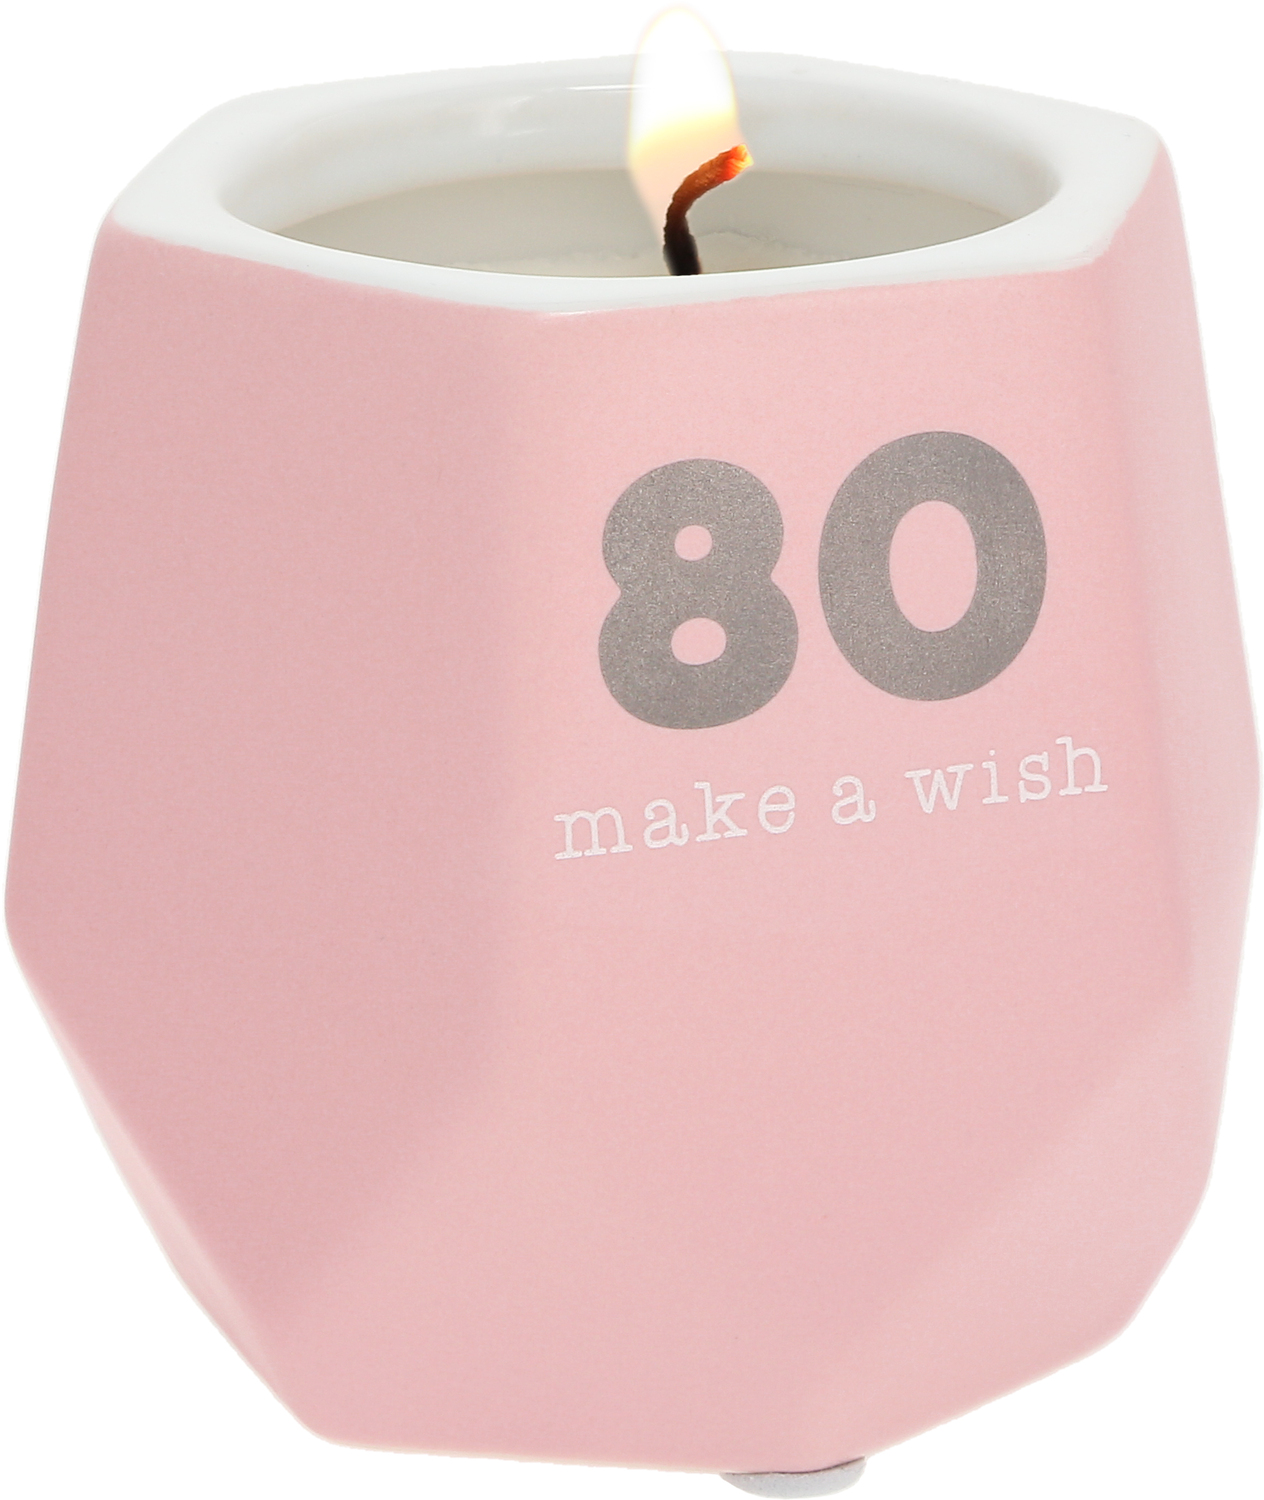 80 by Happy Confetti to You - 80 - 8 oz - 100% Soy Wax Candle
Scent: Tranquility